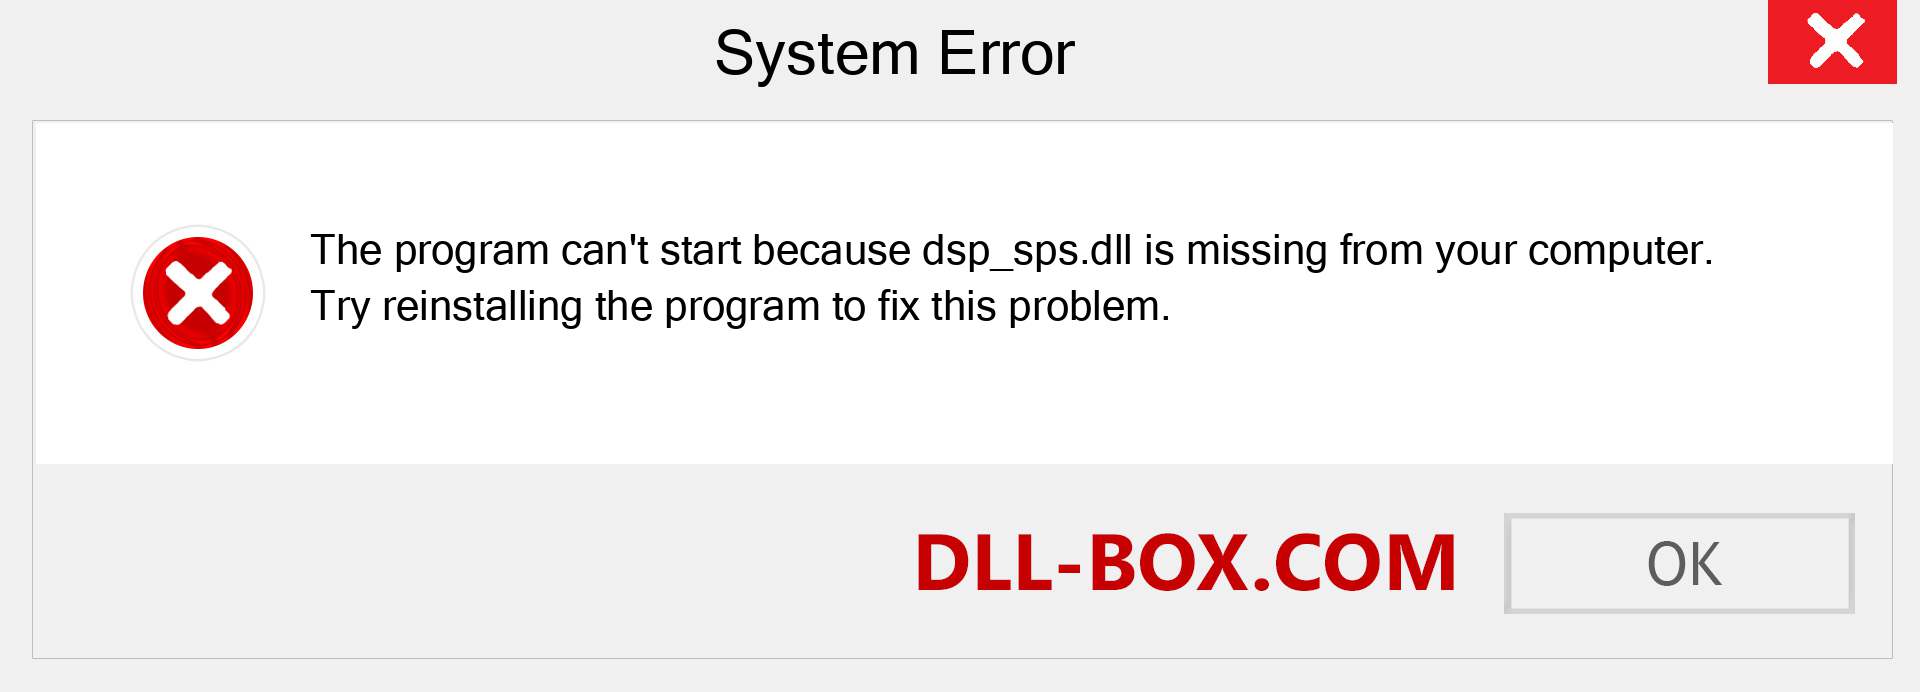  dsp_sps.dll file is missing?. Download for Windows 7, 8, 10 - Fix  dsp_sps dll Missing Error on Windows, photos, images